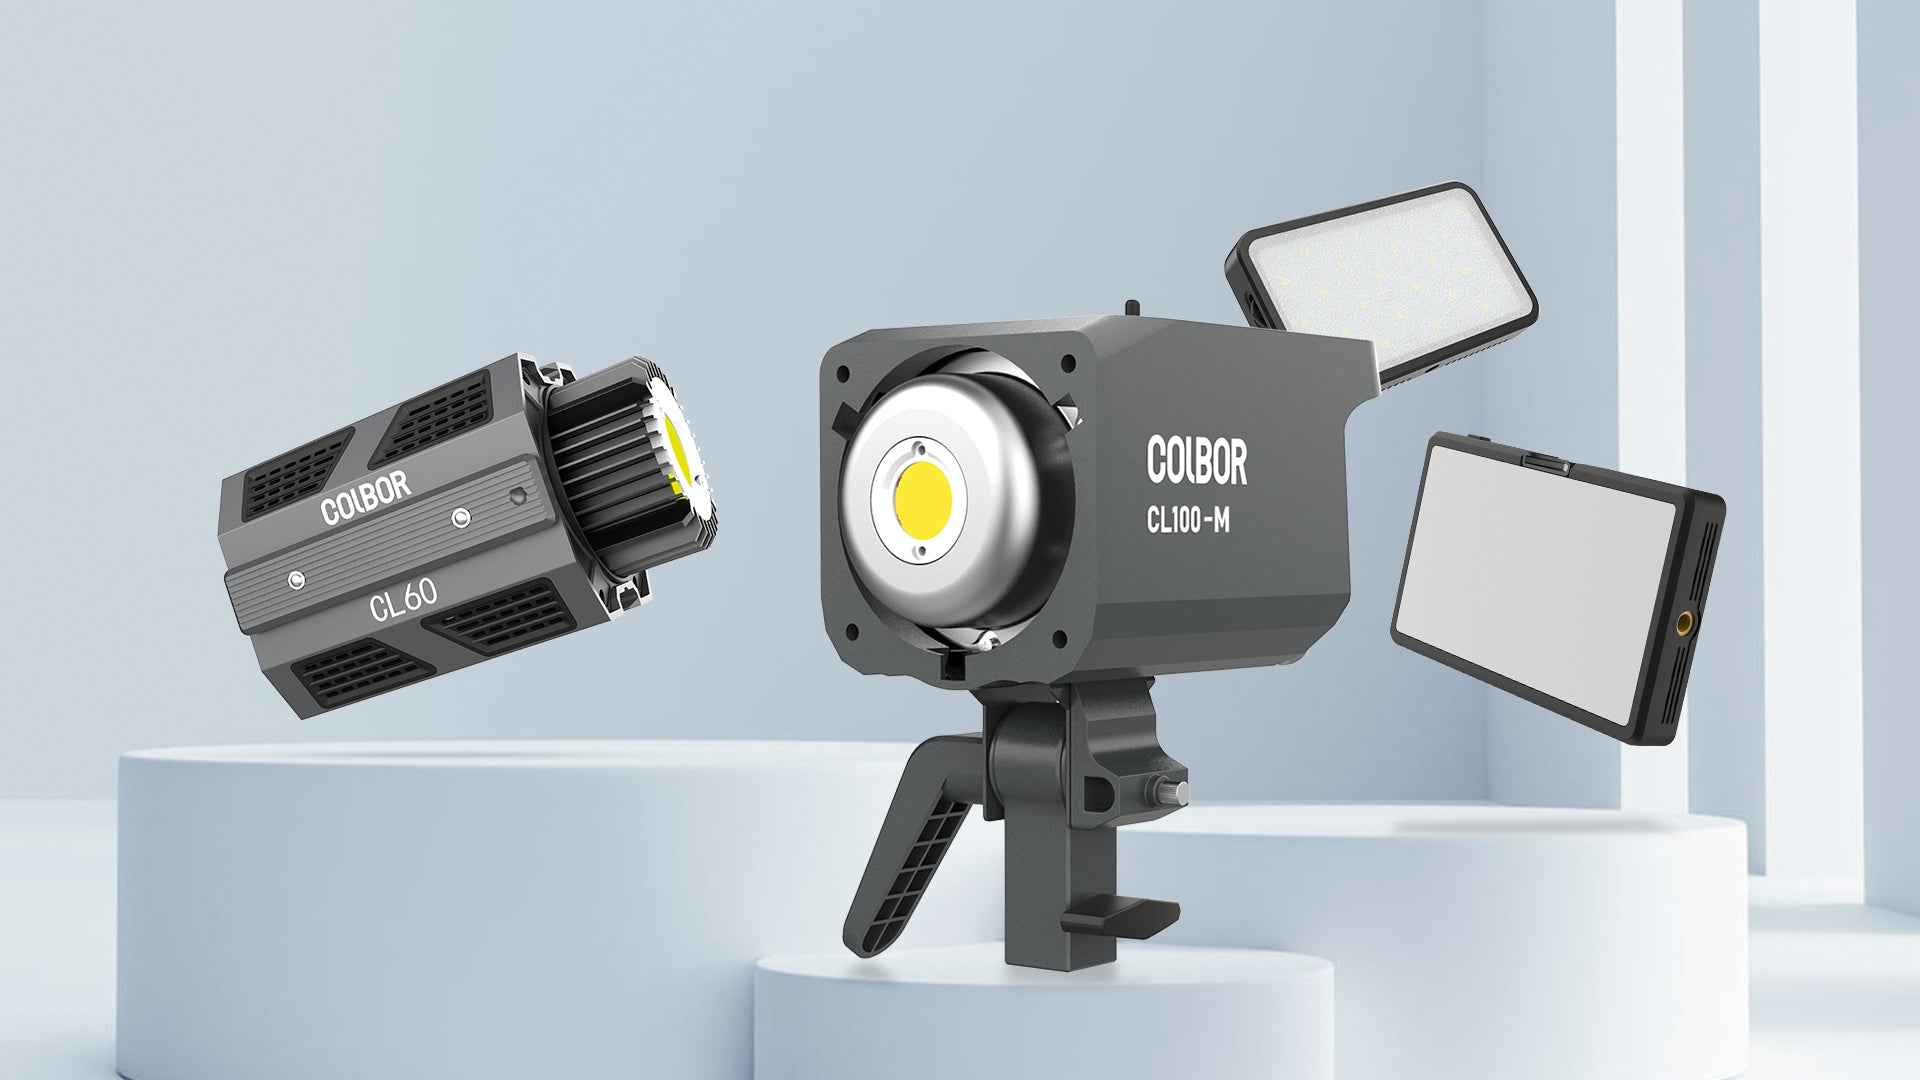 What is the best lighting equipment for video at COLBOR?